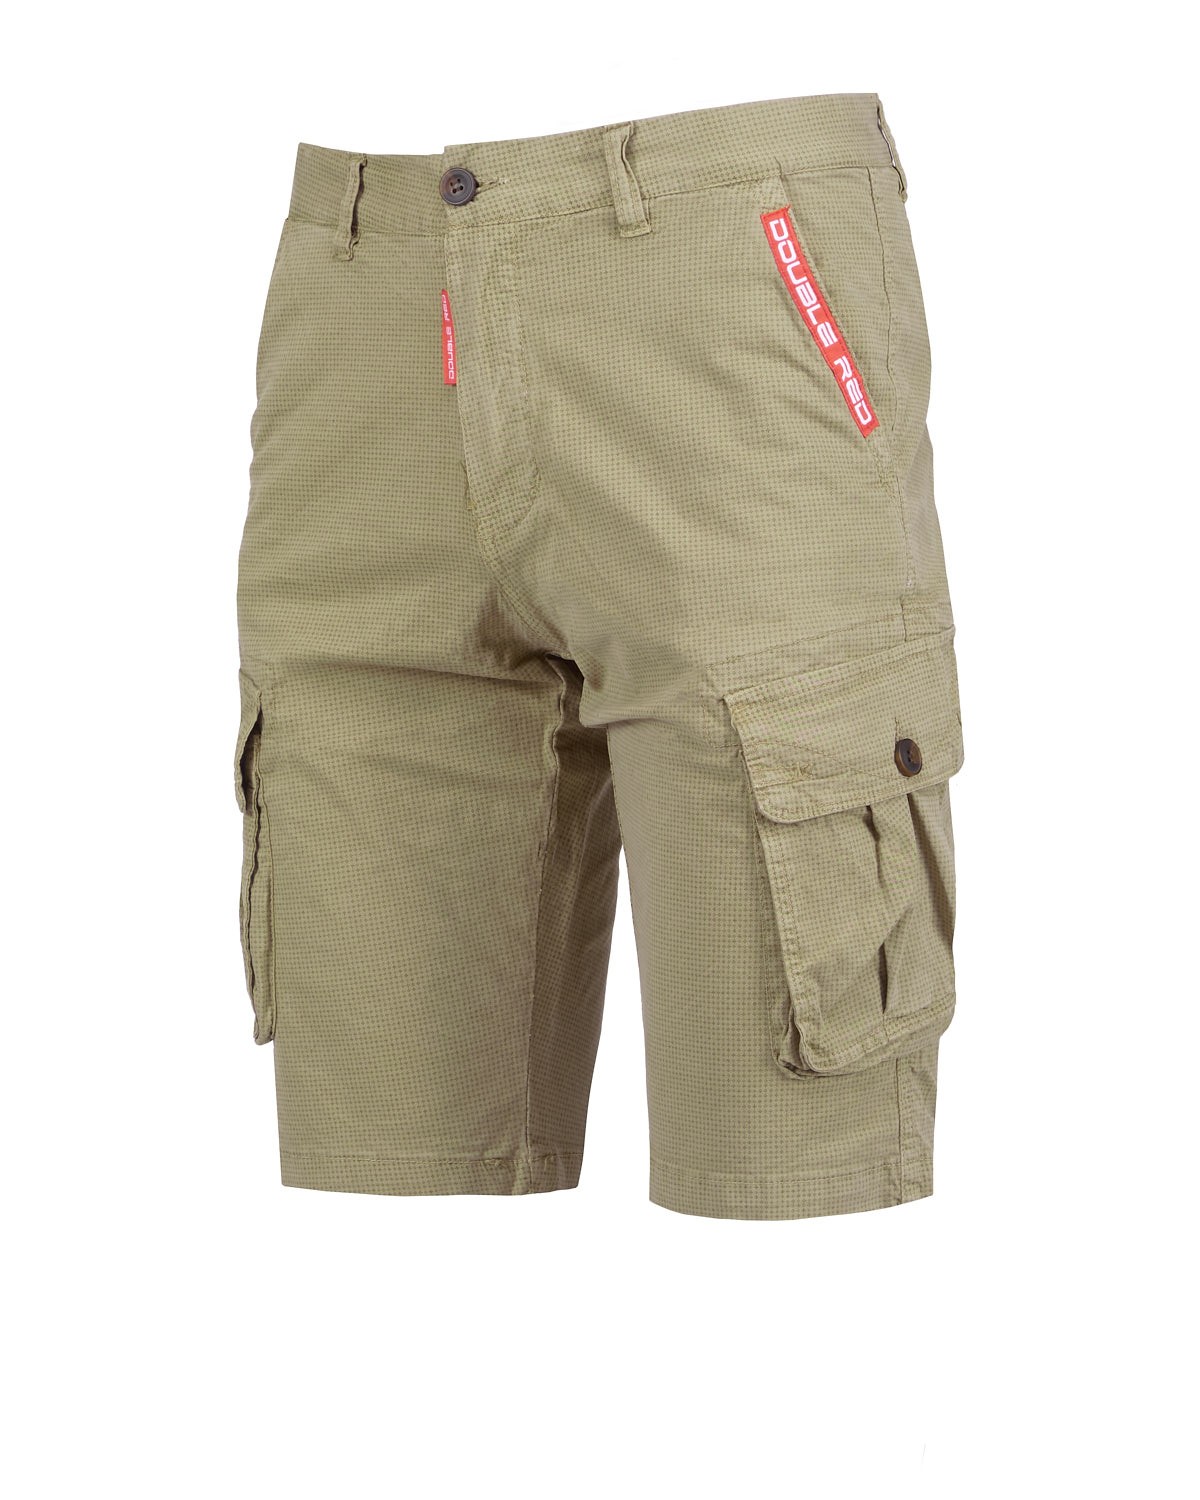 SQUERS - Double Shorts Red Desert